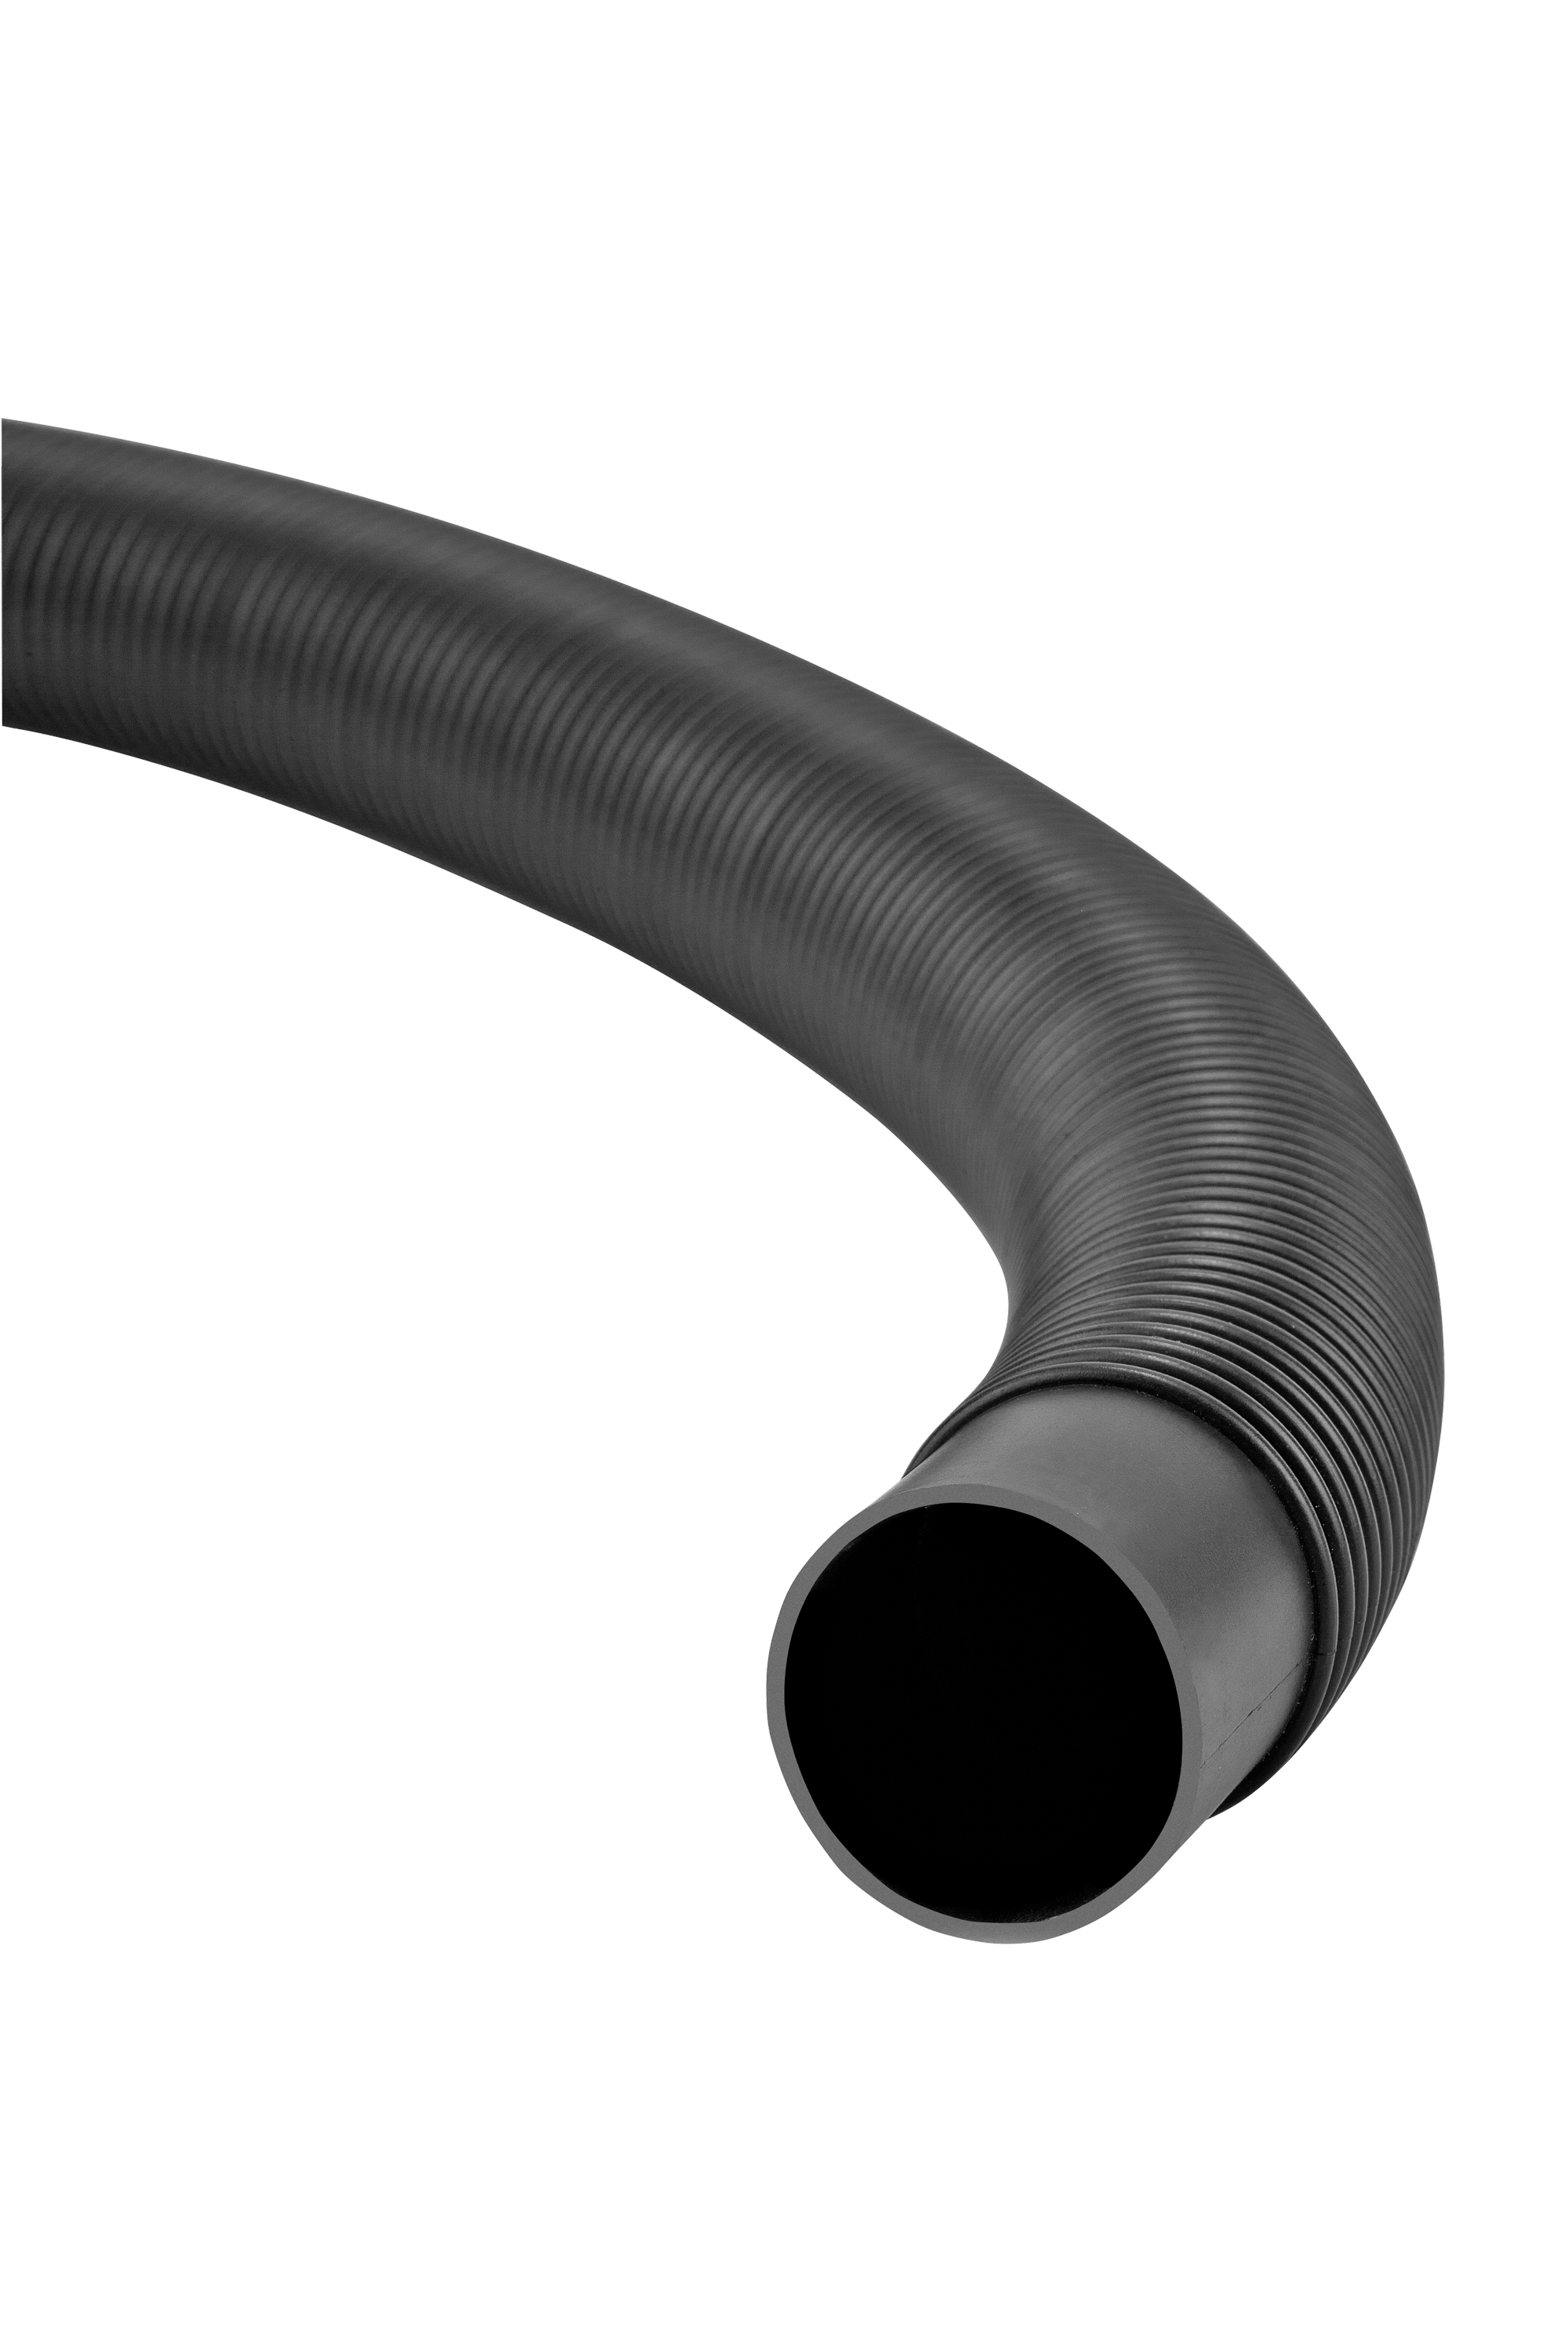 Ribbed Black Flexible Pond Hose 30m or 98 Foot Rolls All Diameters Great Value 